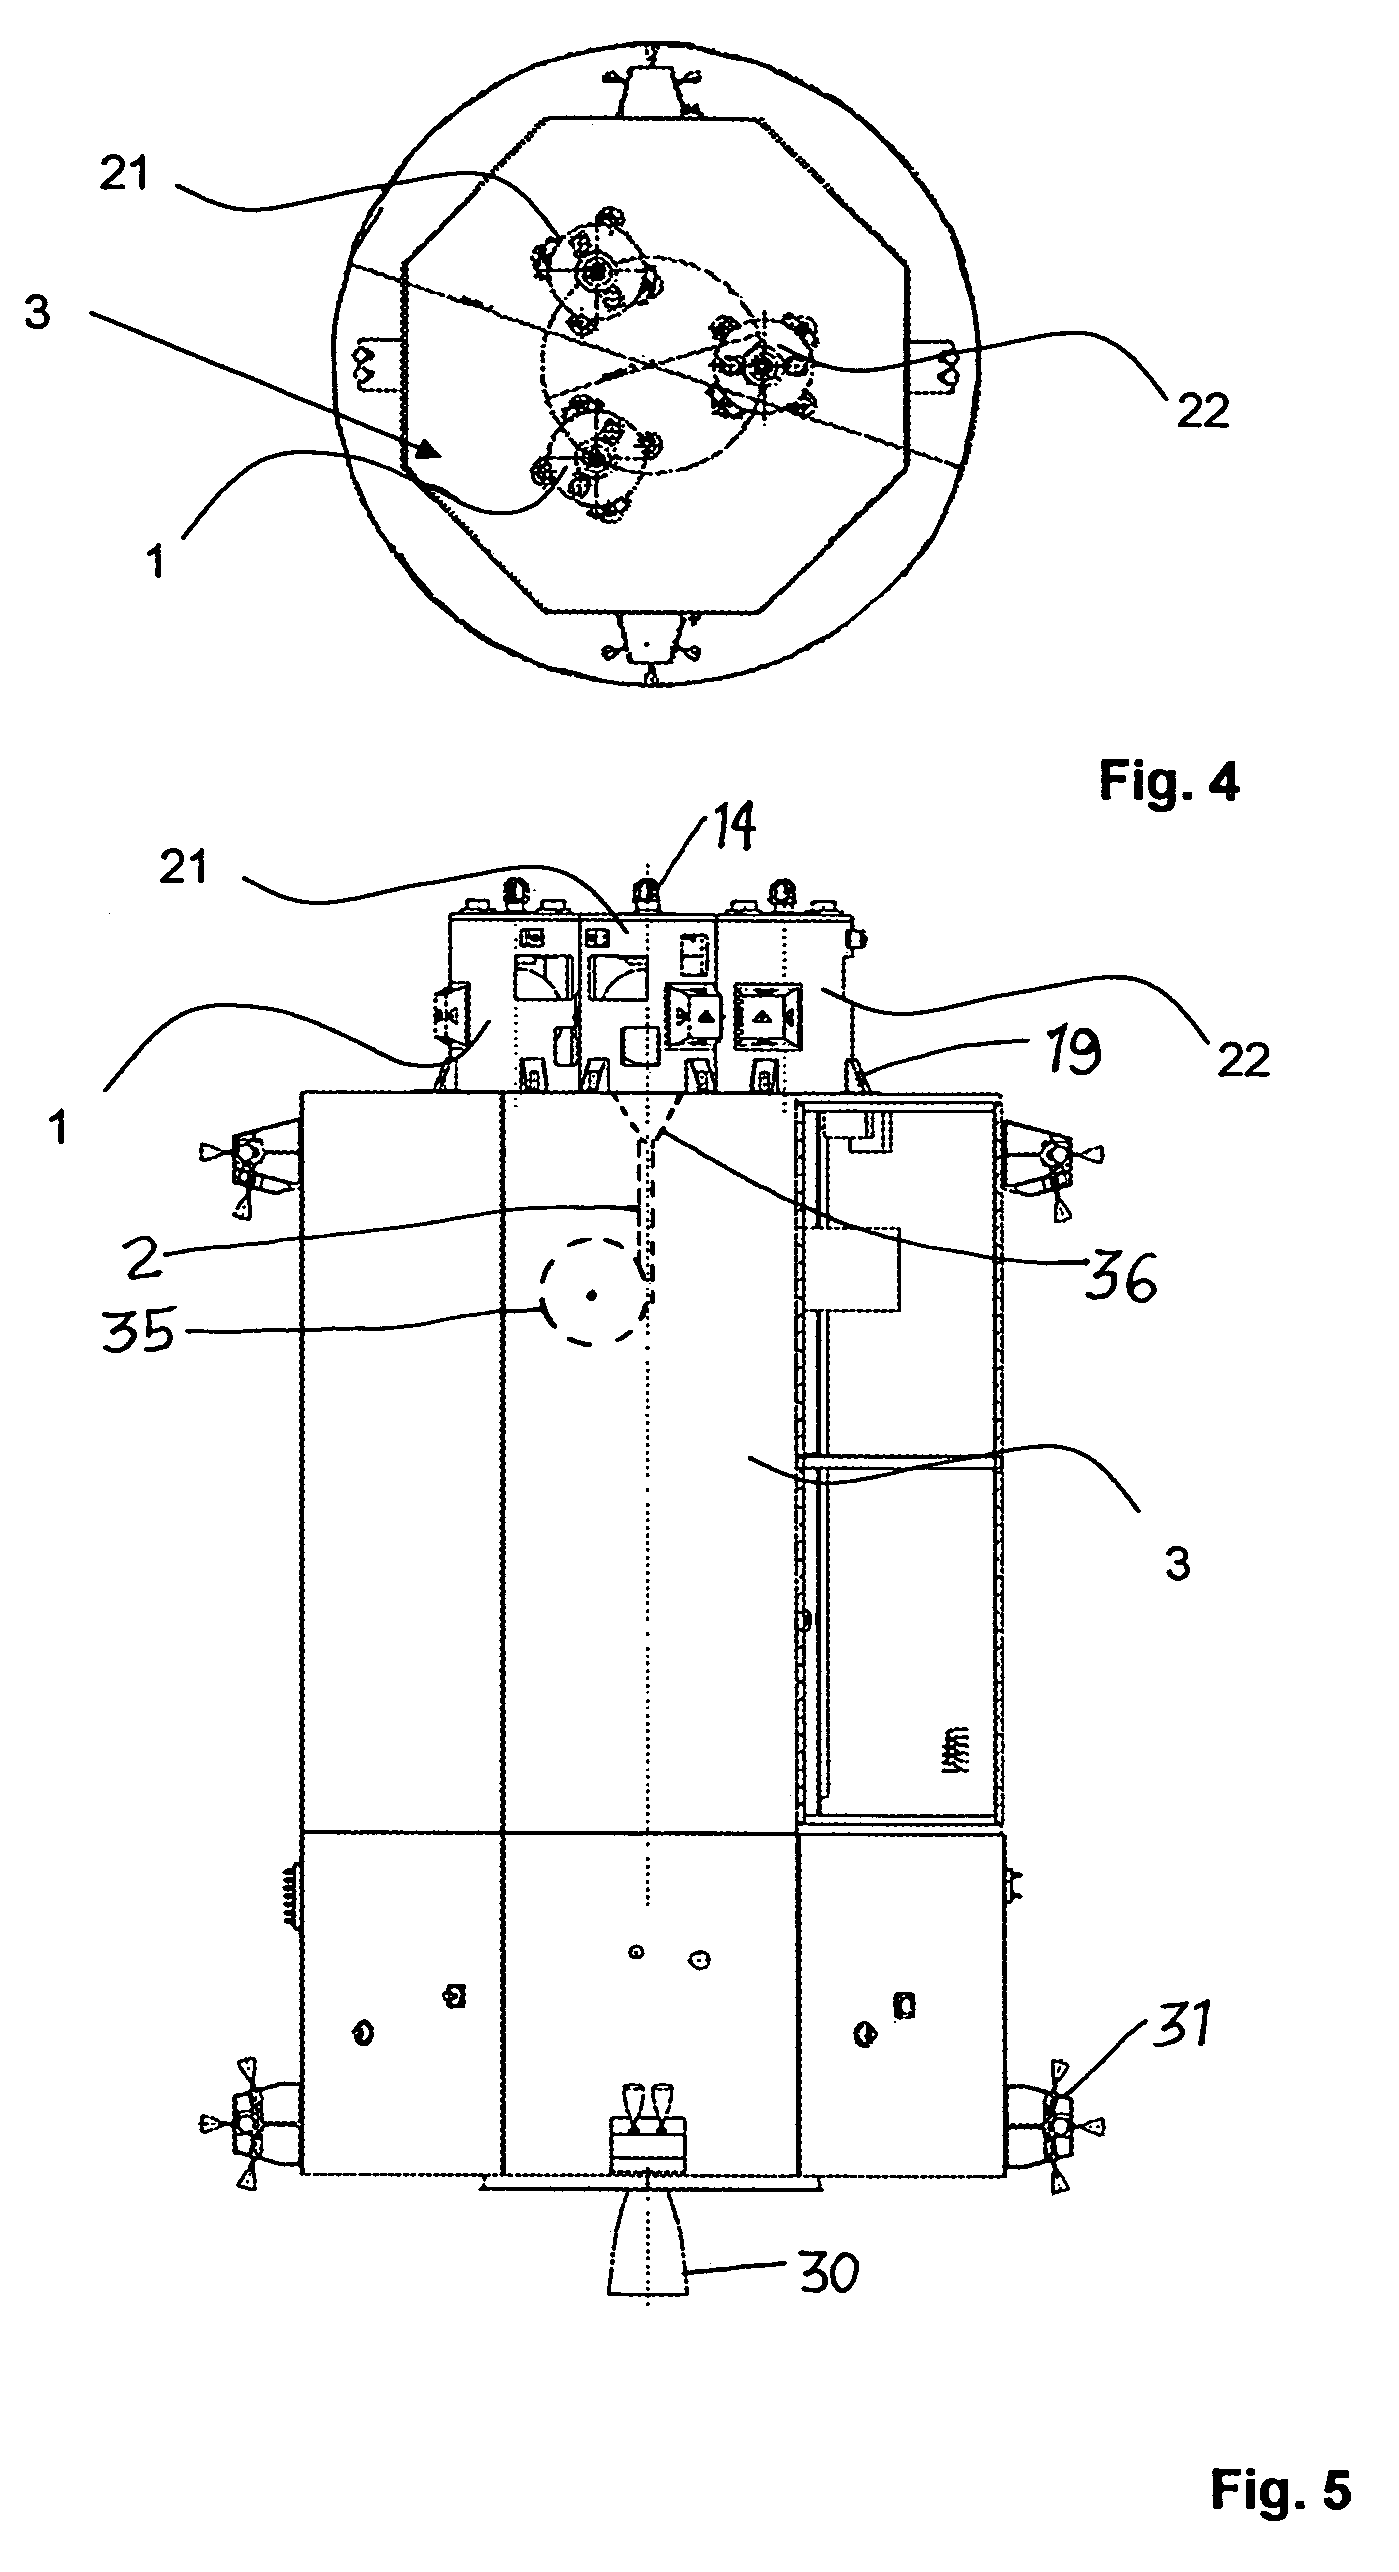 Apparatus for grasping objects in space